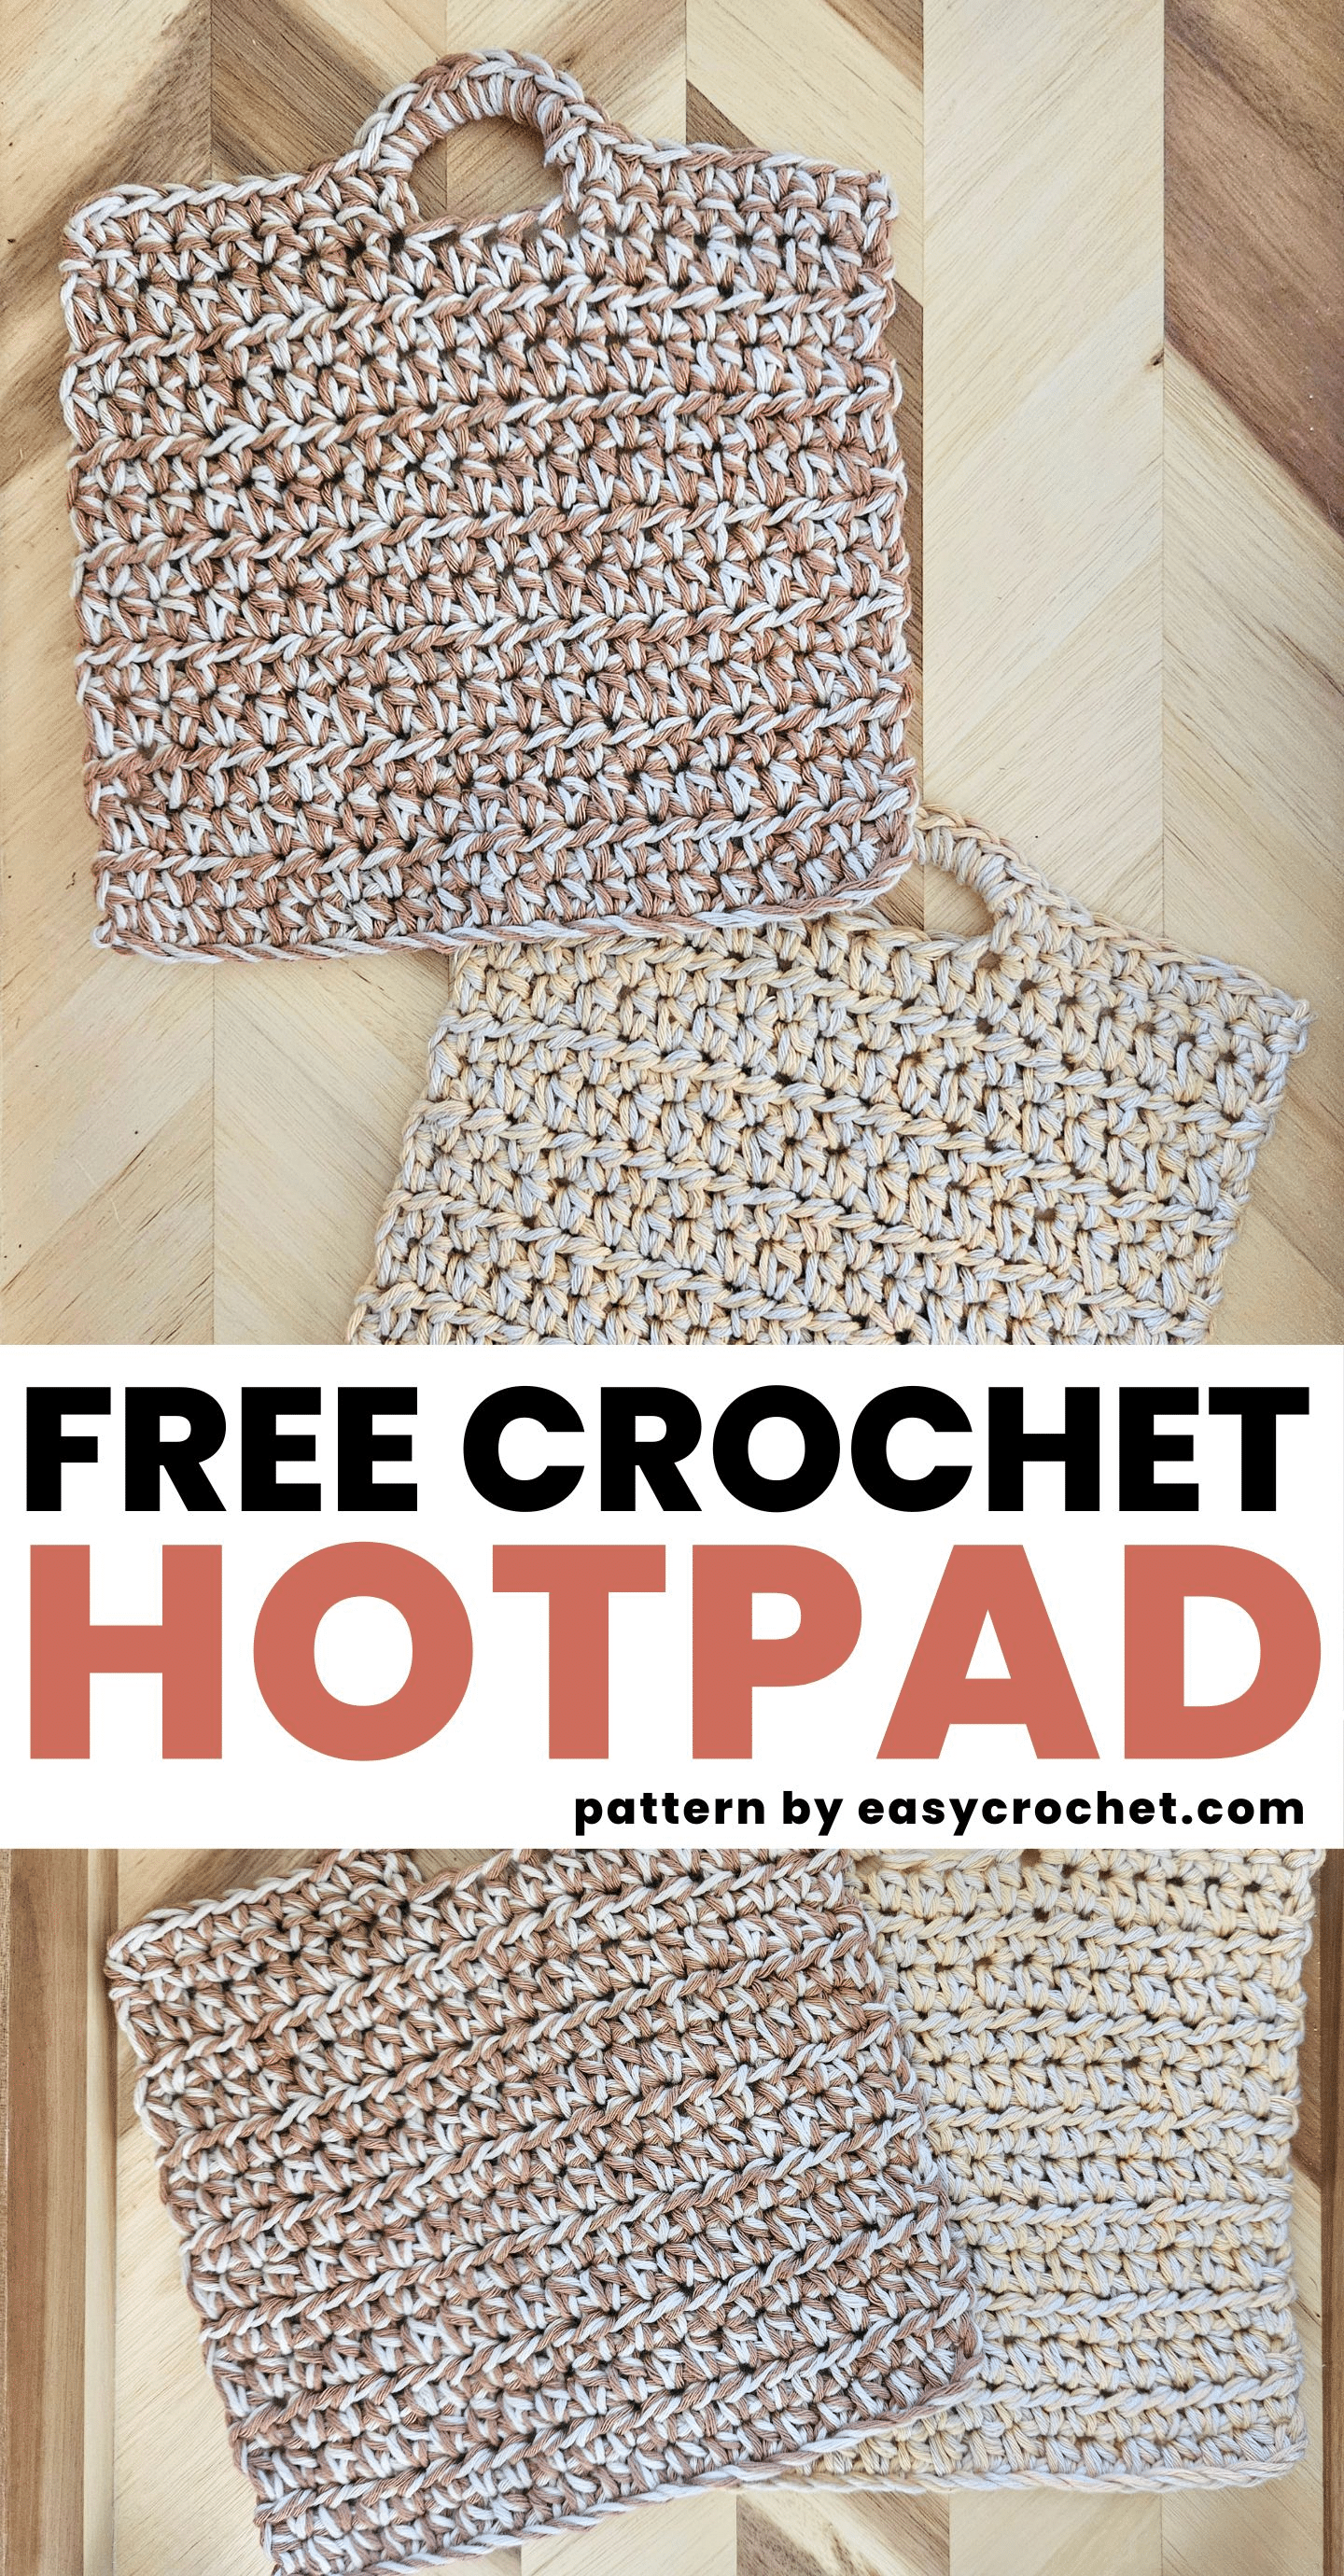 crochet hotpad pattern with handles